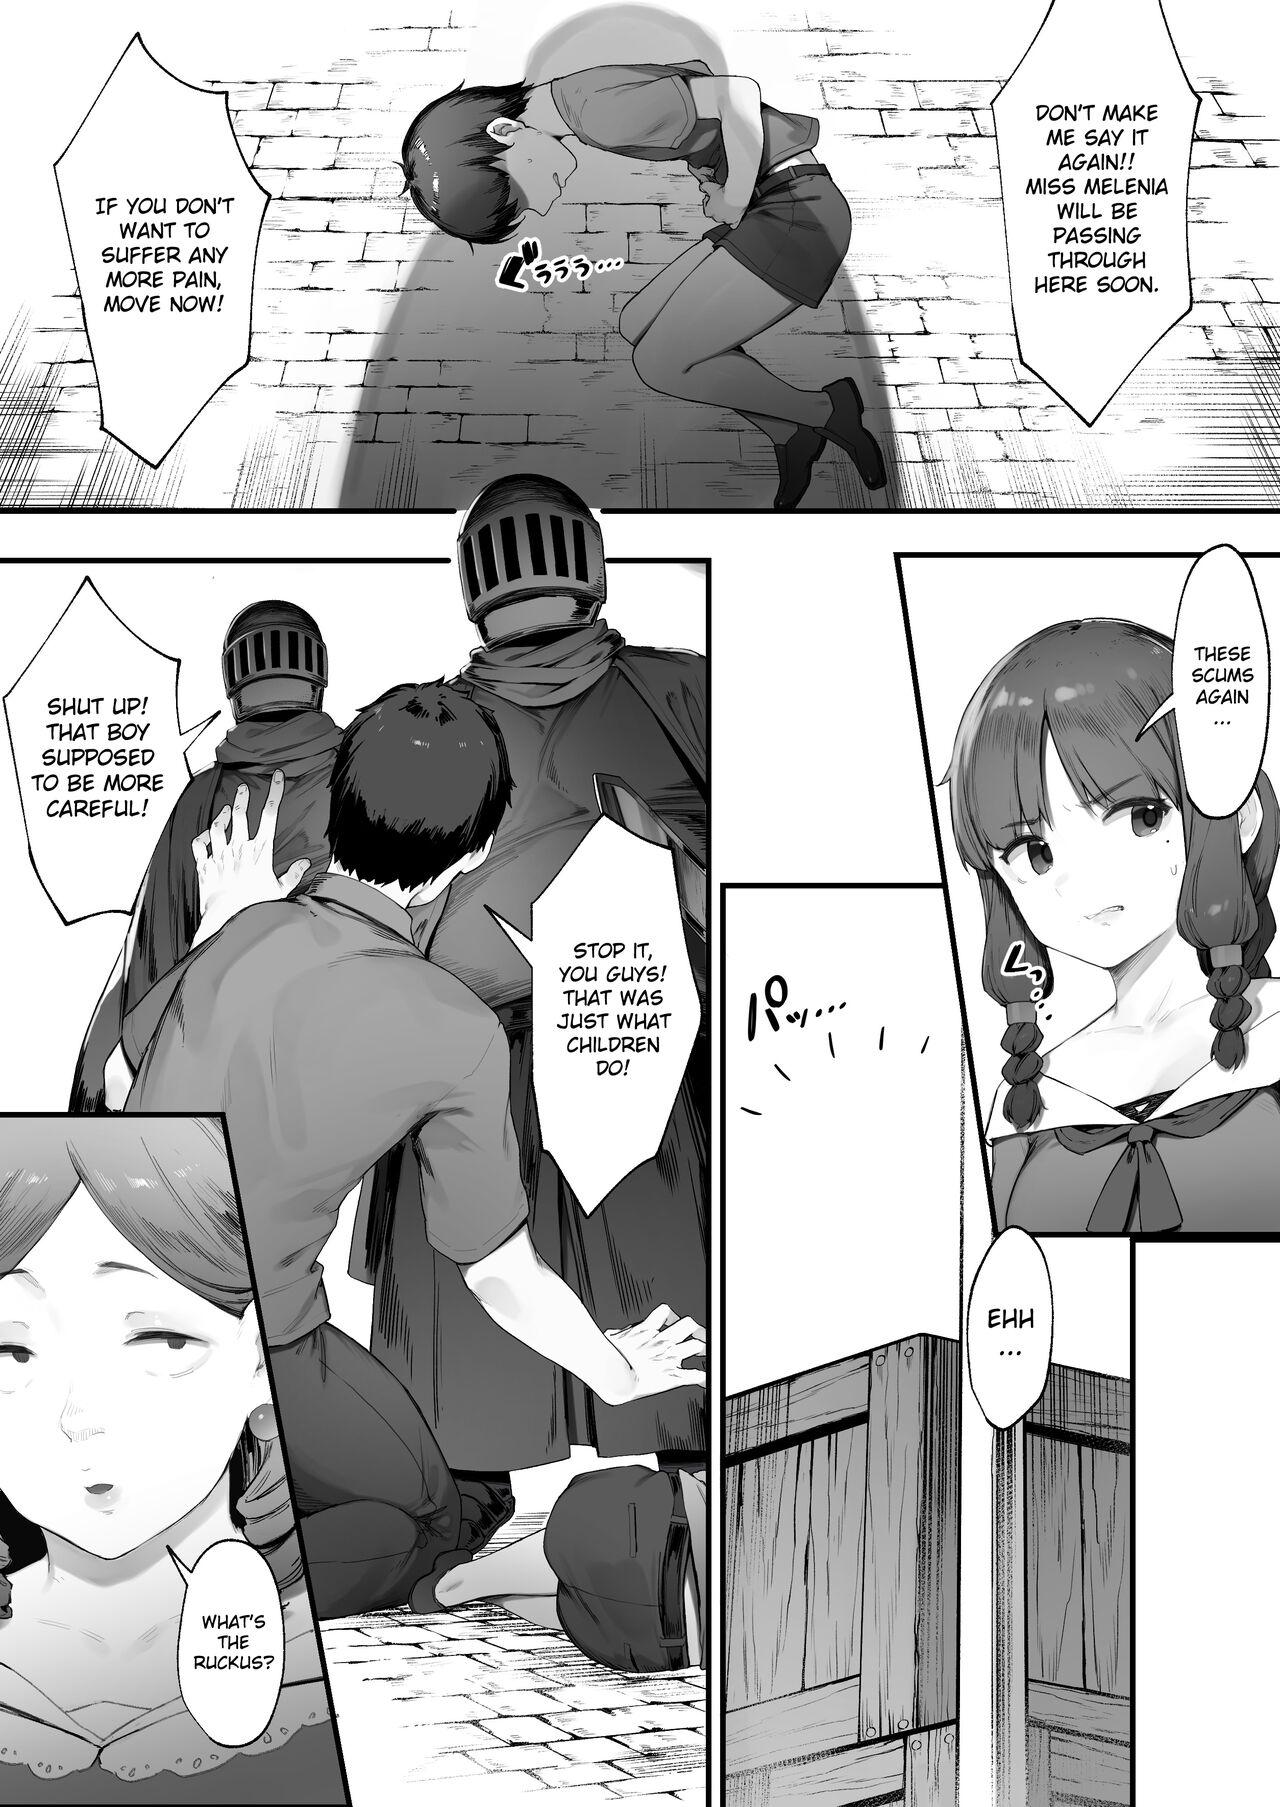 Cougar Oujo no Meirei de Stalker to Kekkon Saserareru Hanashi 1 | A story about being married to a stalker by the order of a princess 1 - Original Flaquita - Page 4